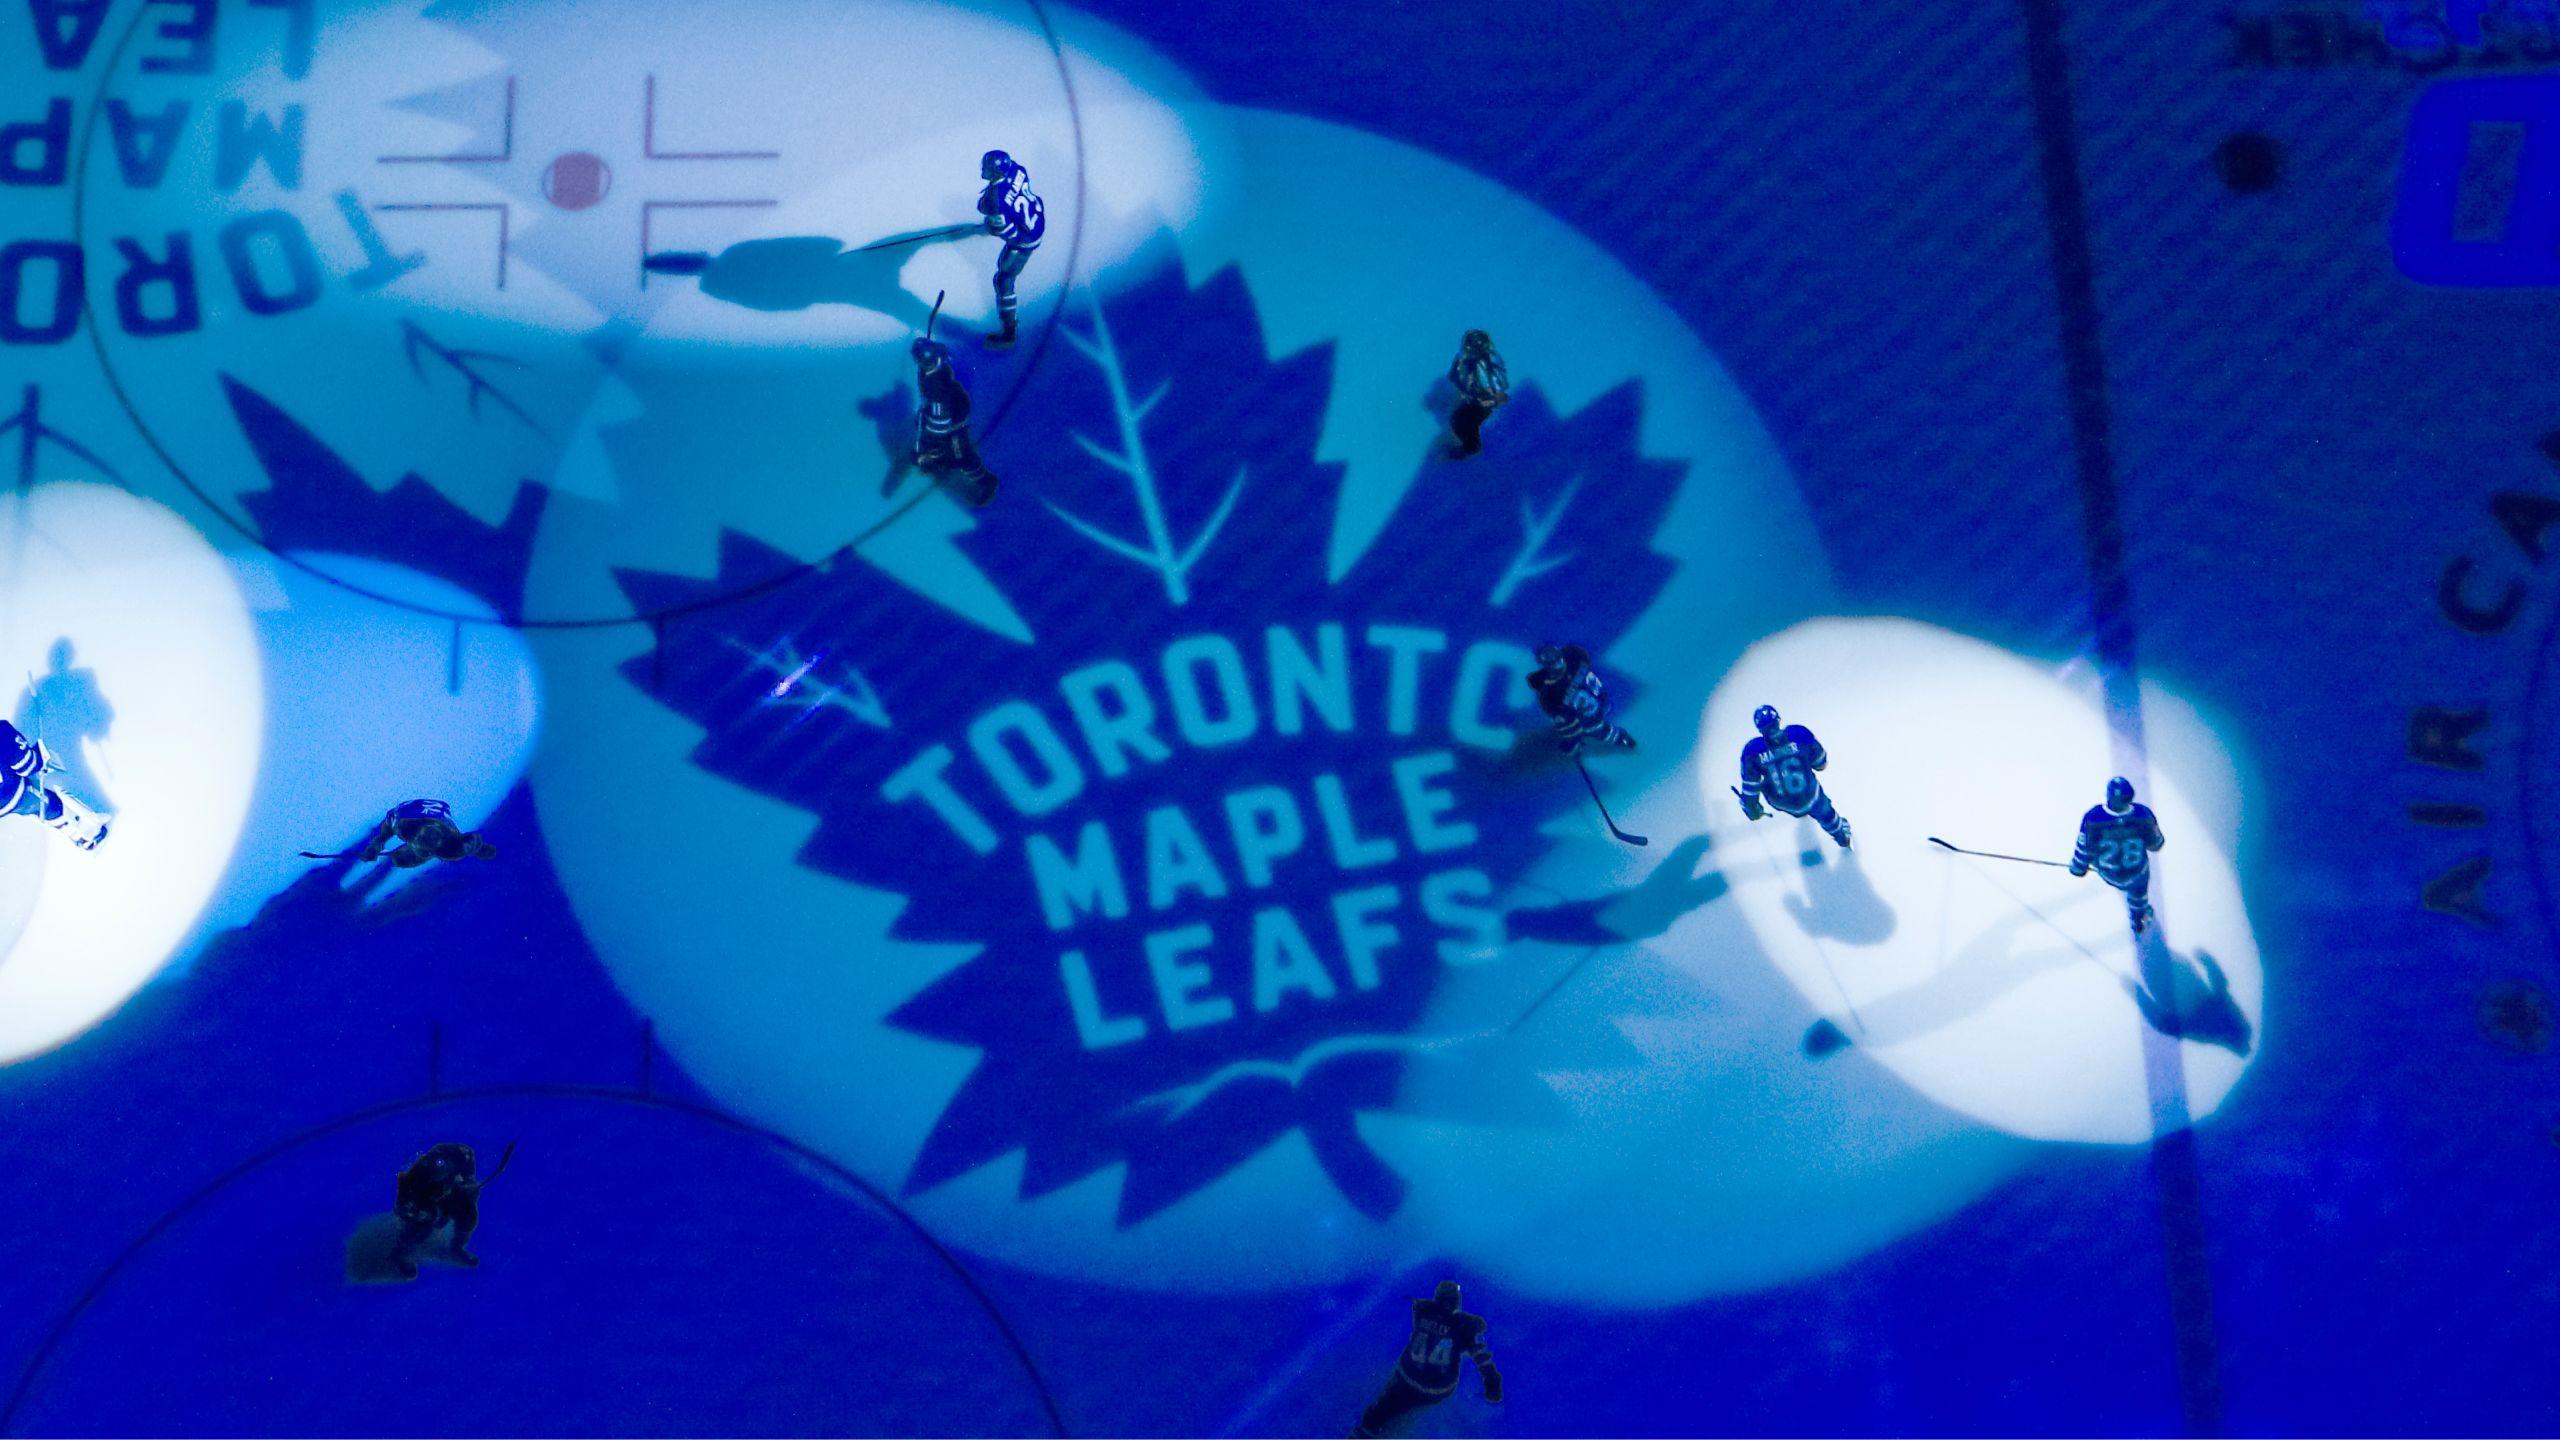 The Story Behind the Toronto Maple Leafs' Adoption of Canada's National Symbol